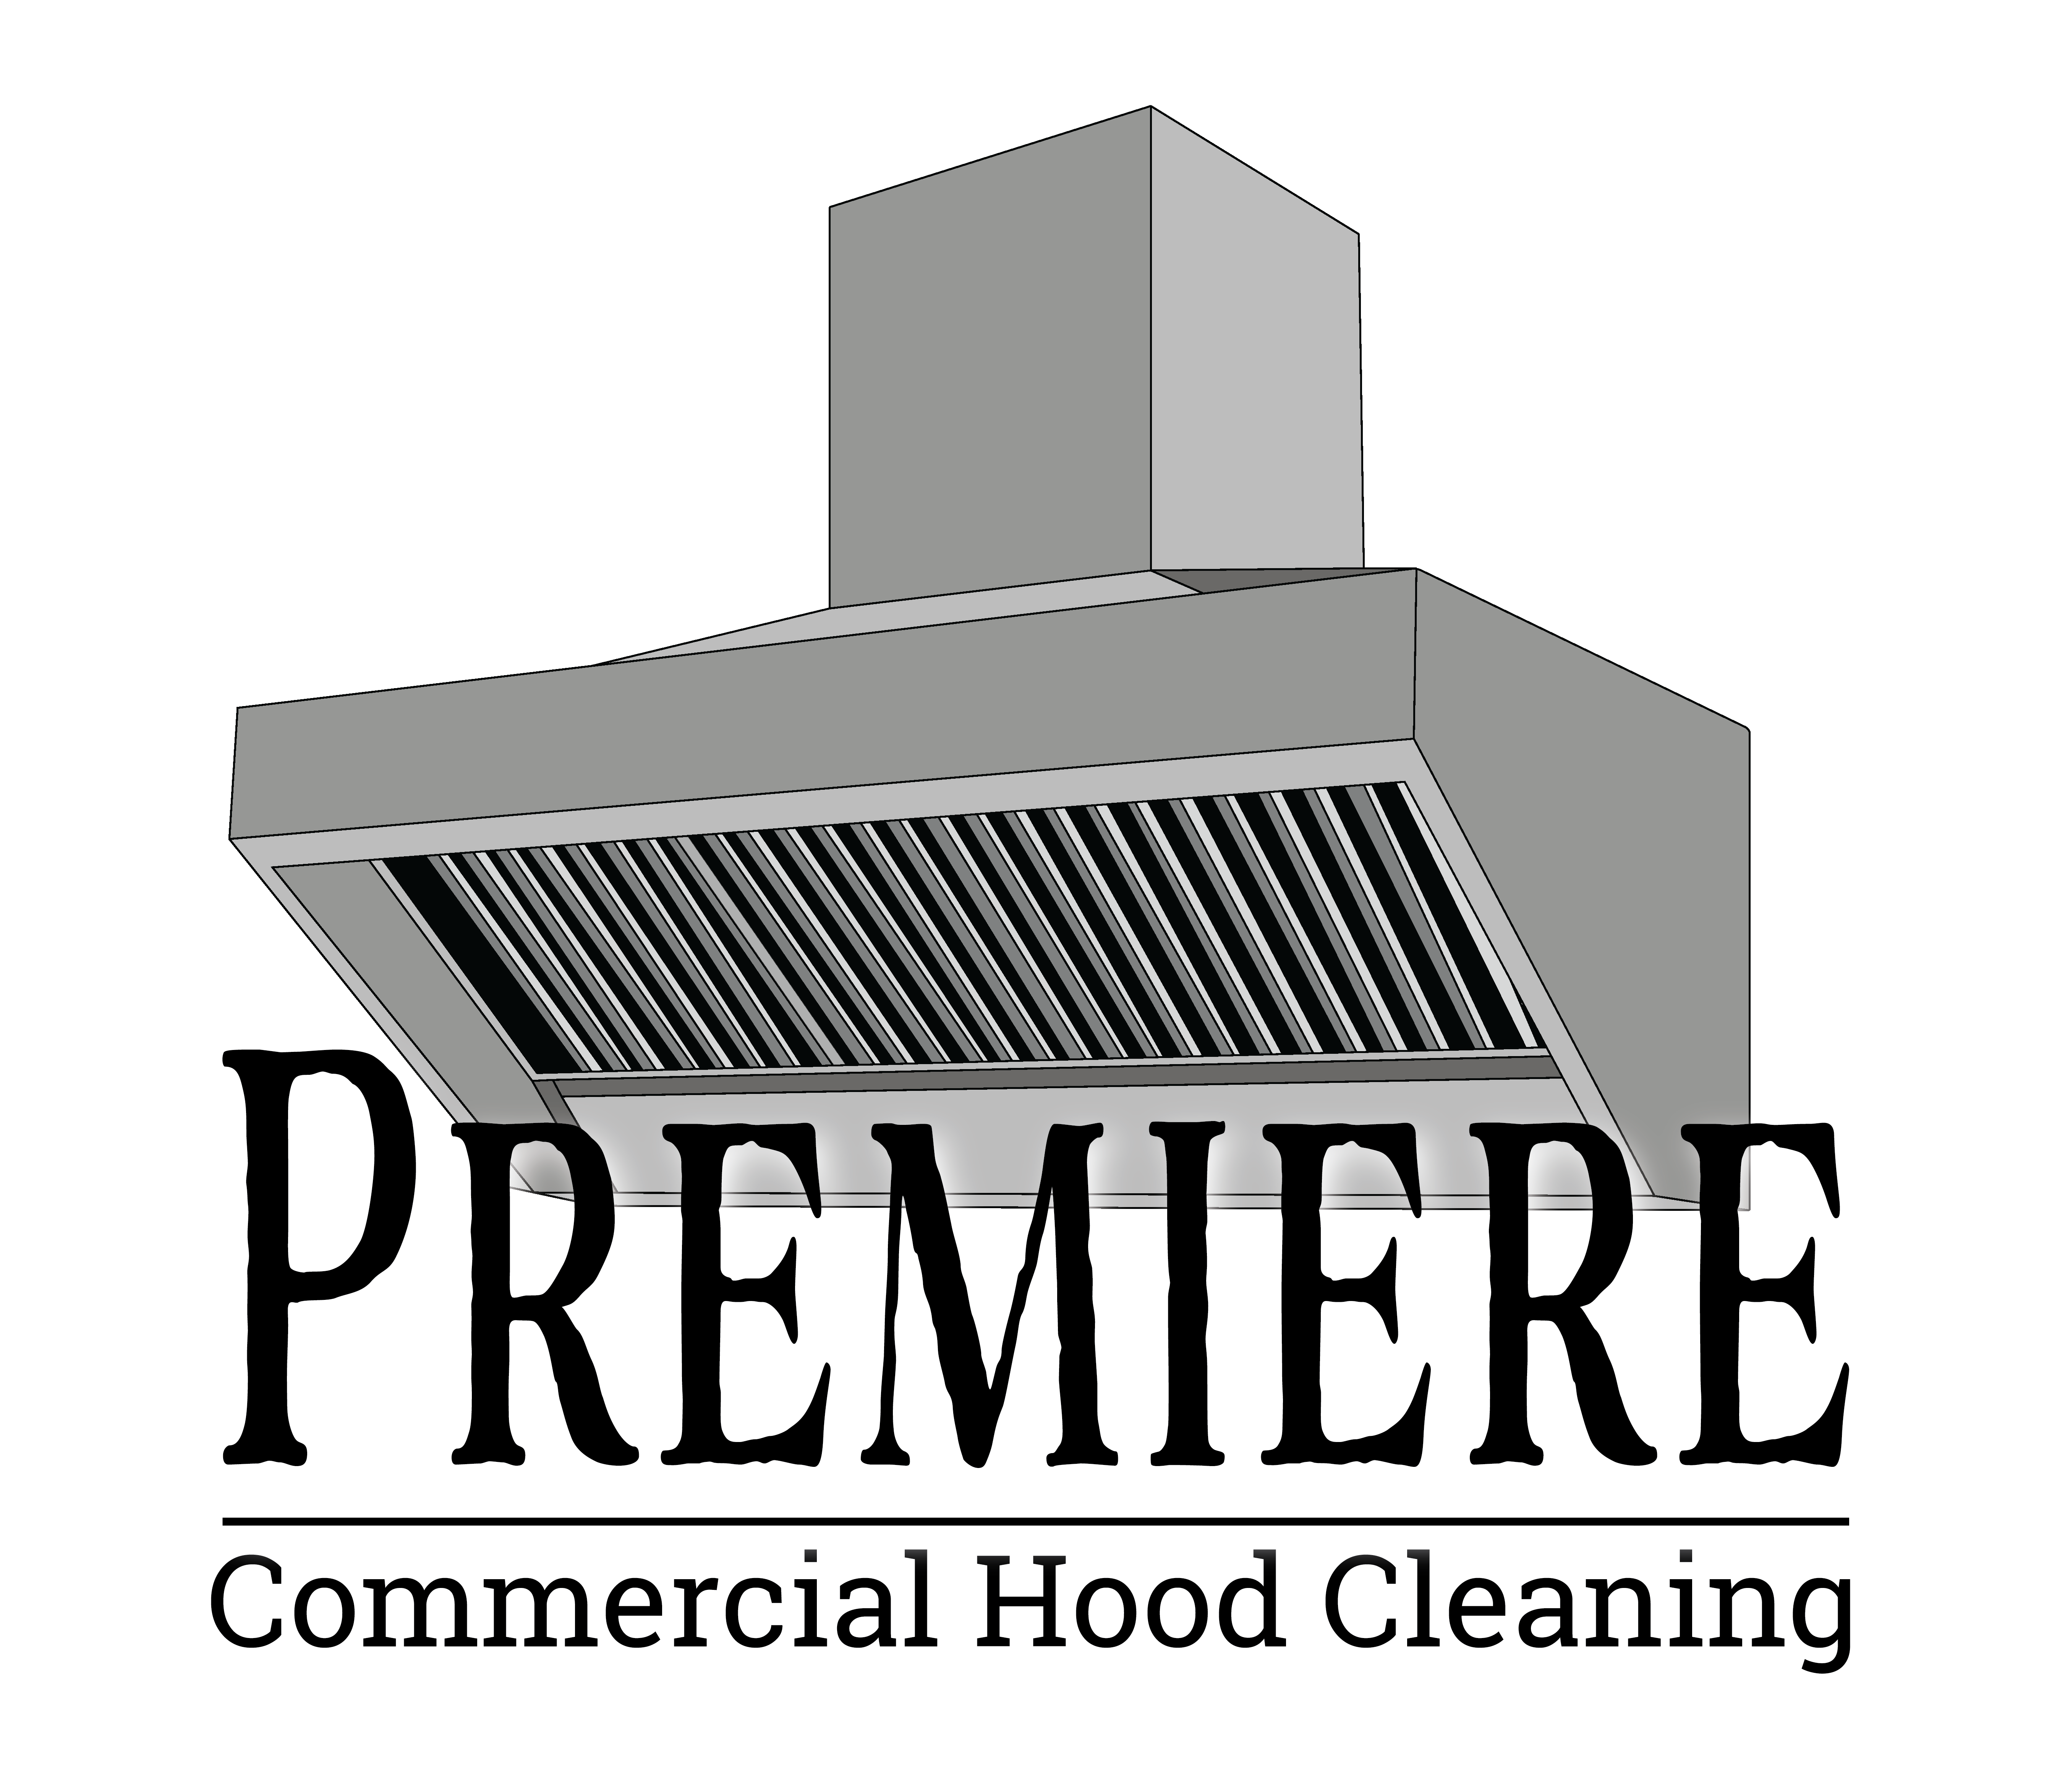 Premiere Commercial Hood Cleaning and Power Washing Logo